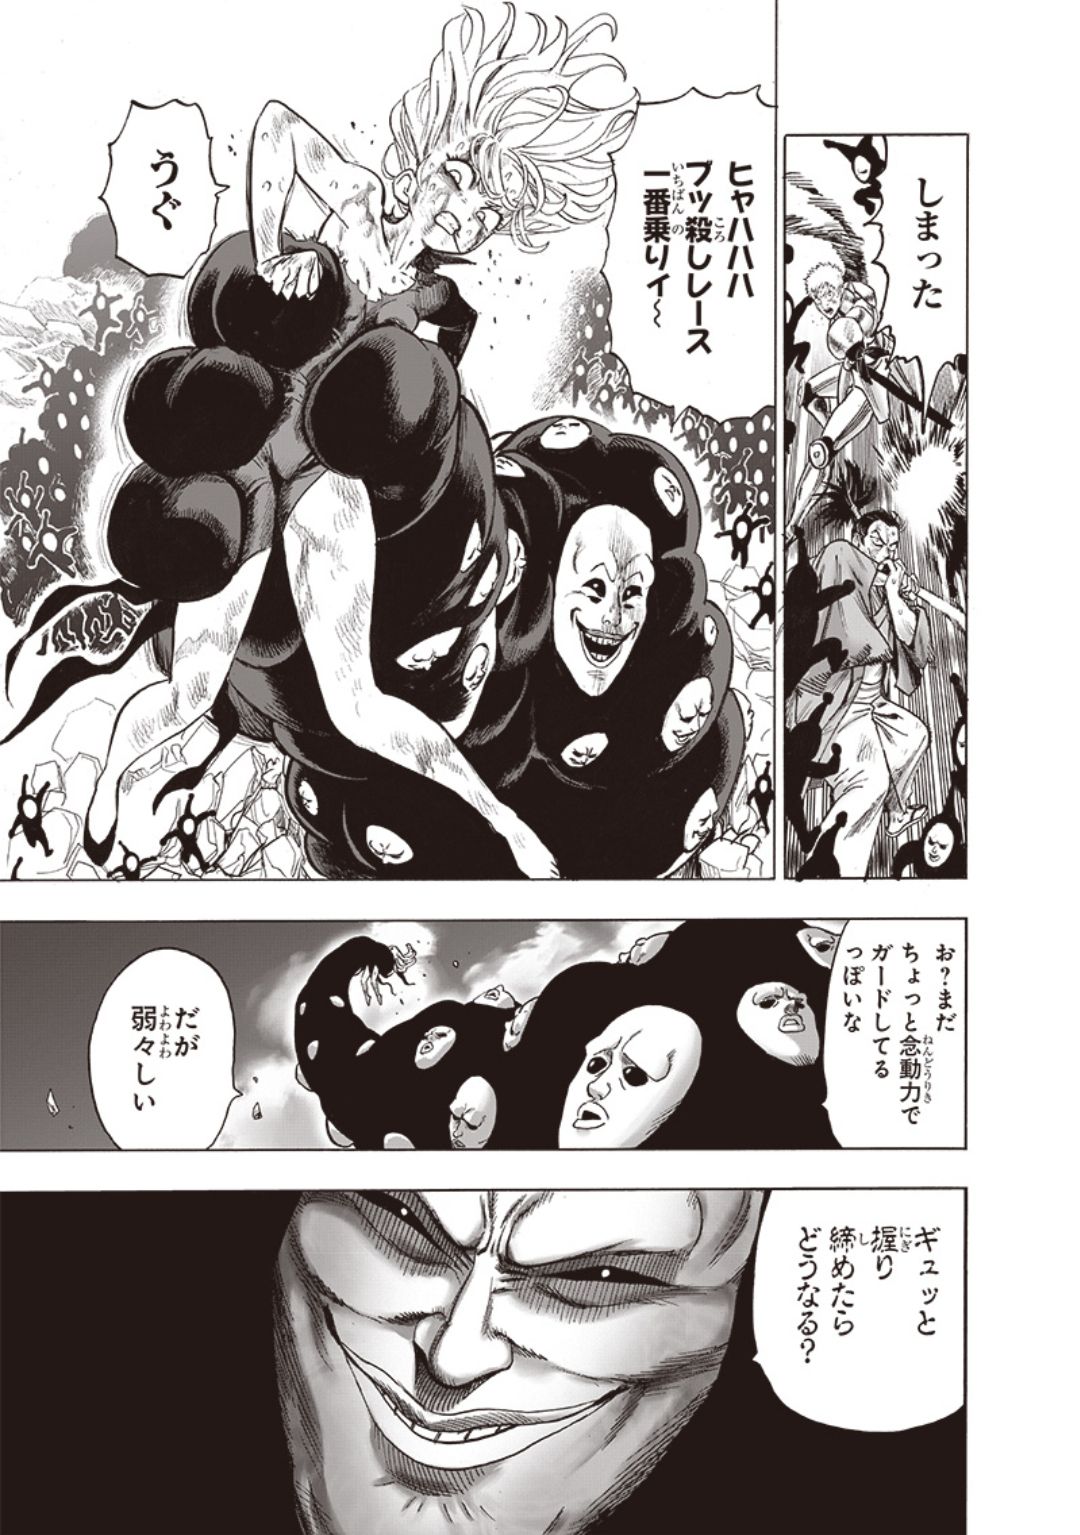 【Image】One Punch Man's latest episode, Tamatsuki's are rubbed by Saitama 3